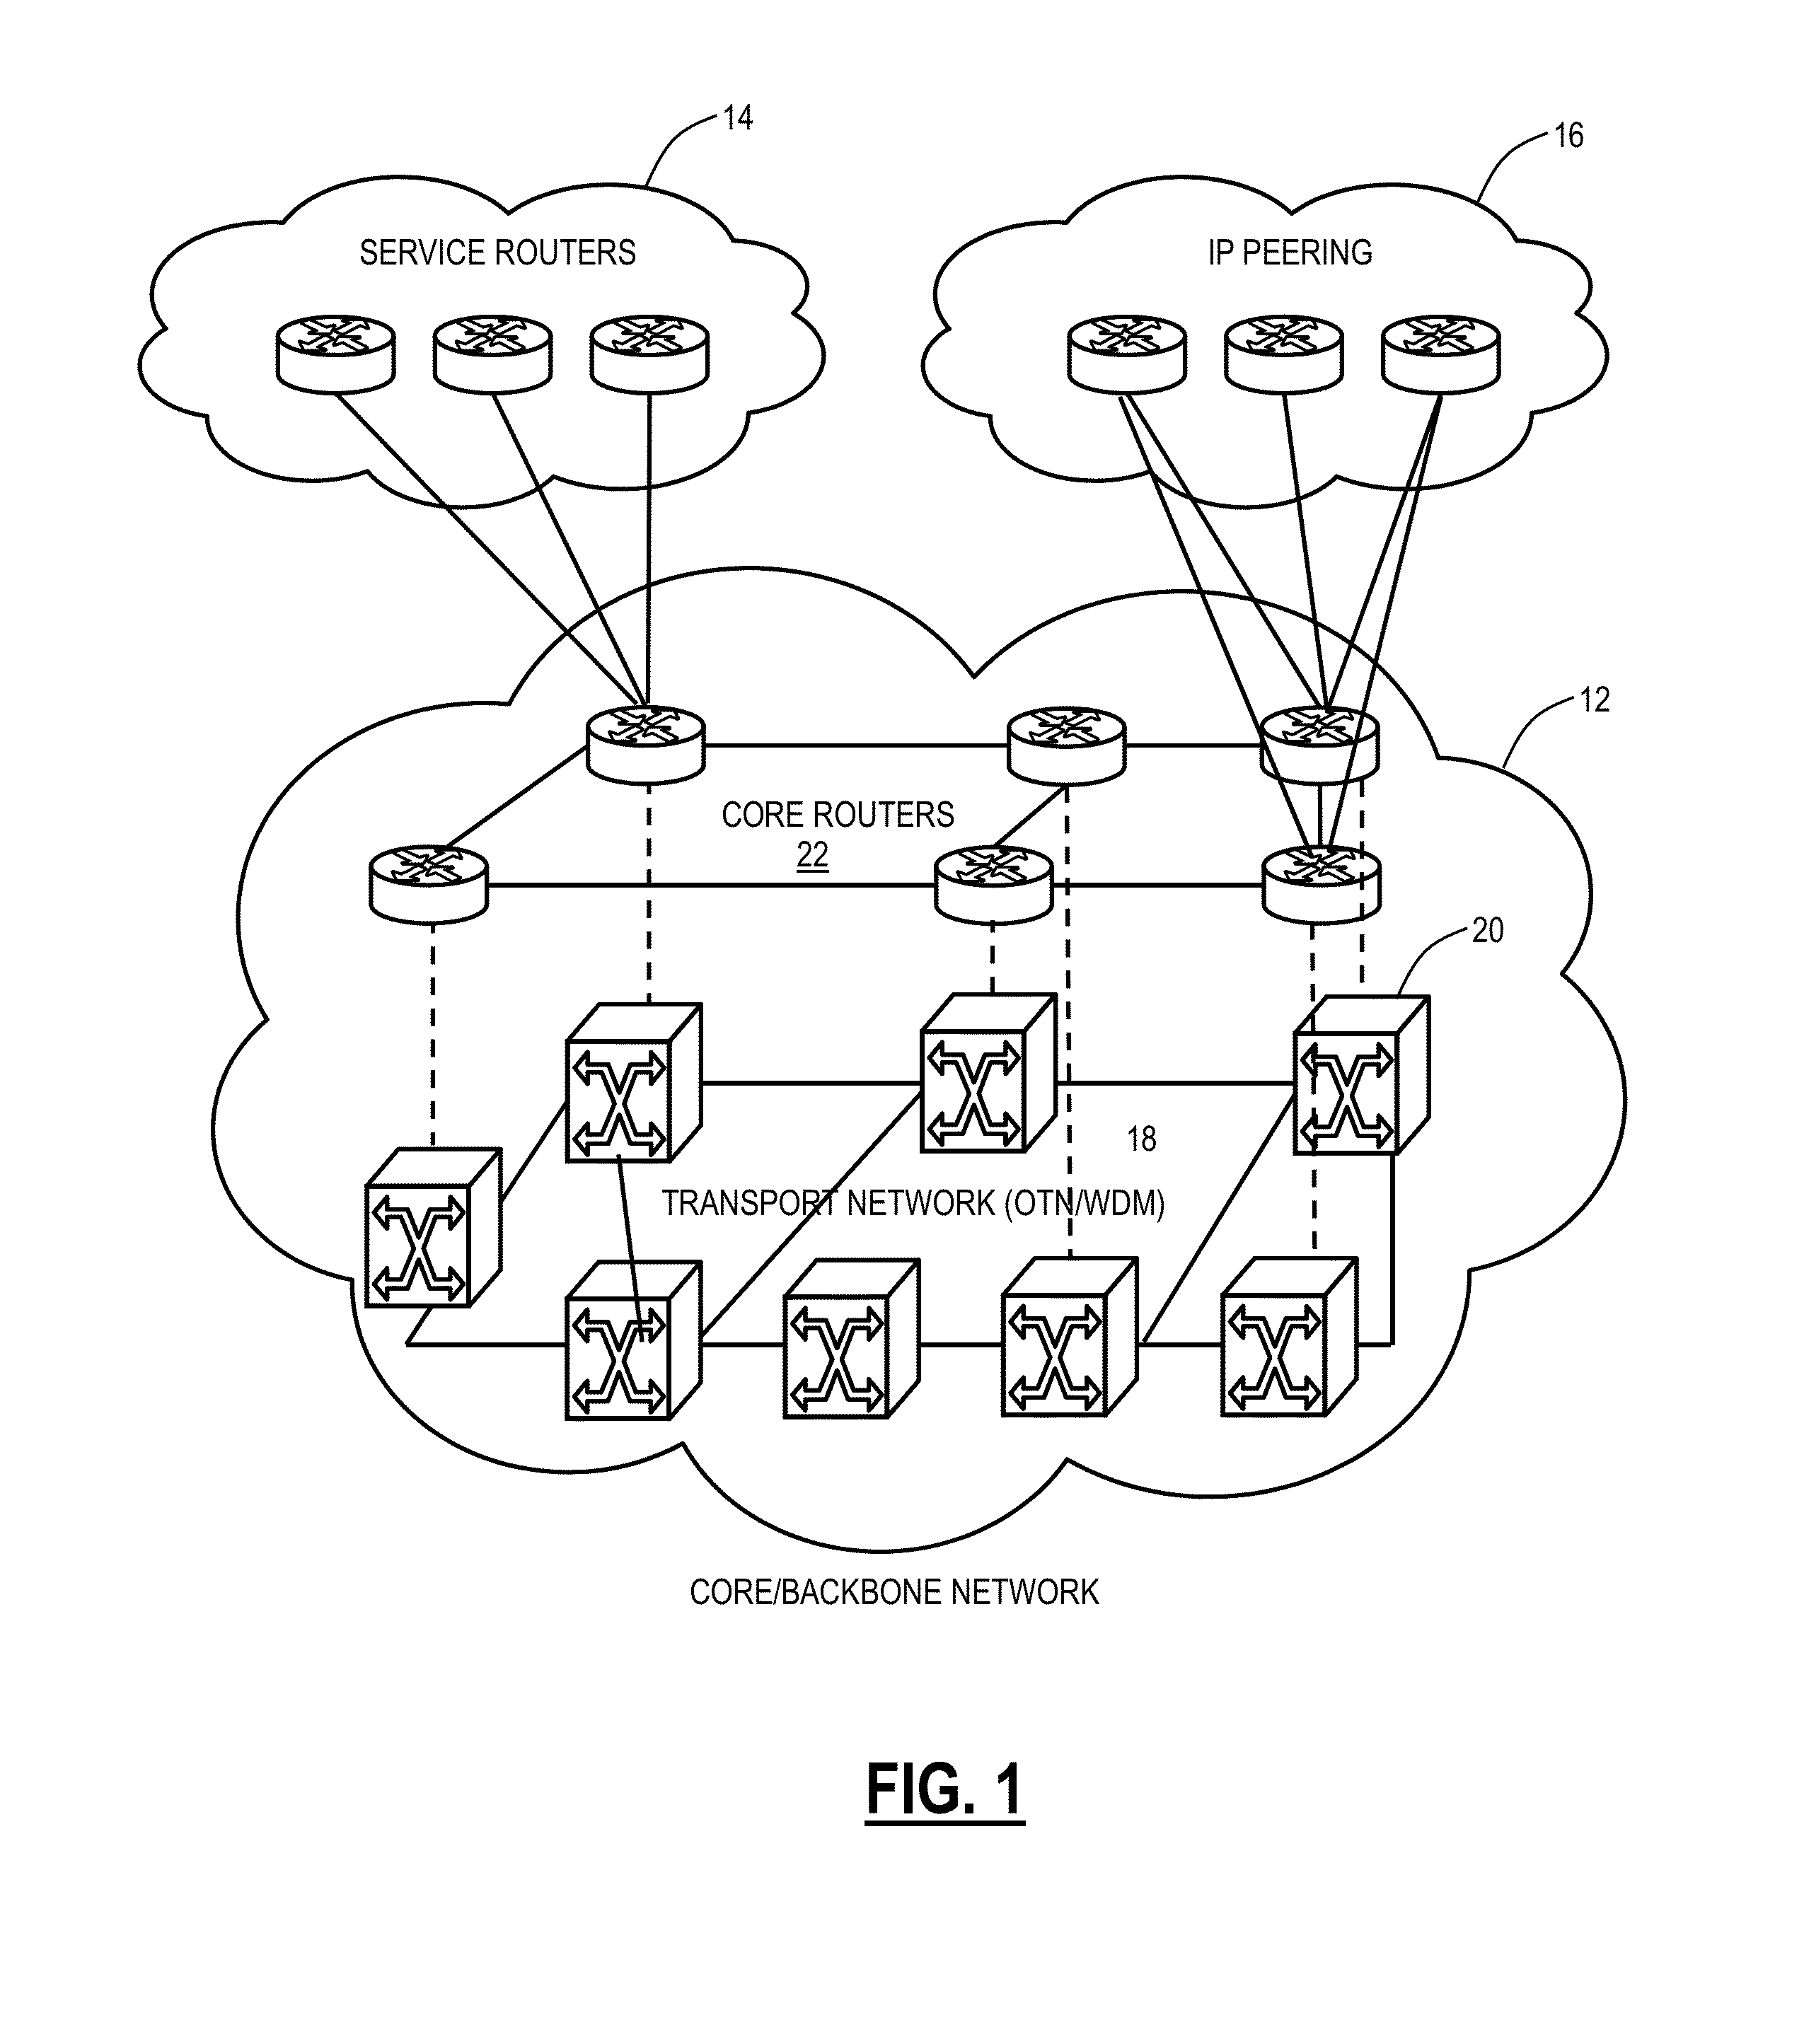 Systems and methods for statistical multiplexing with otn and dwdm